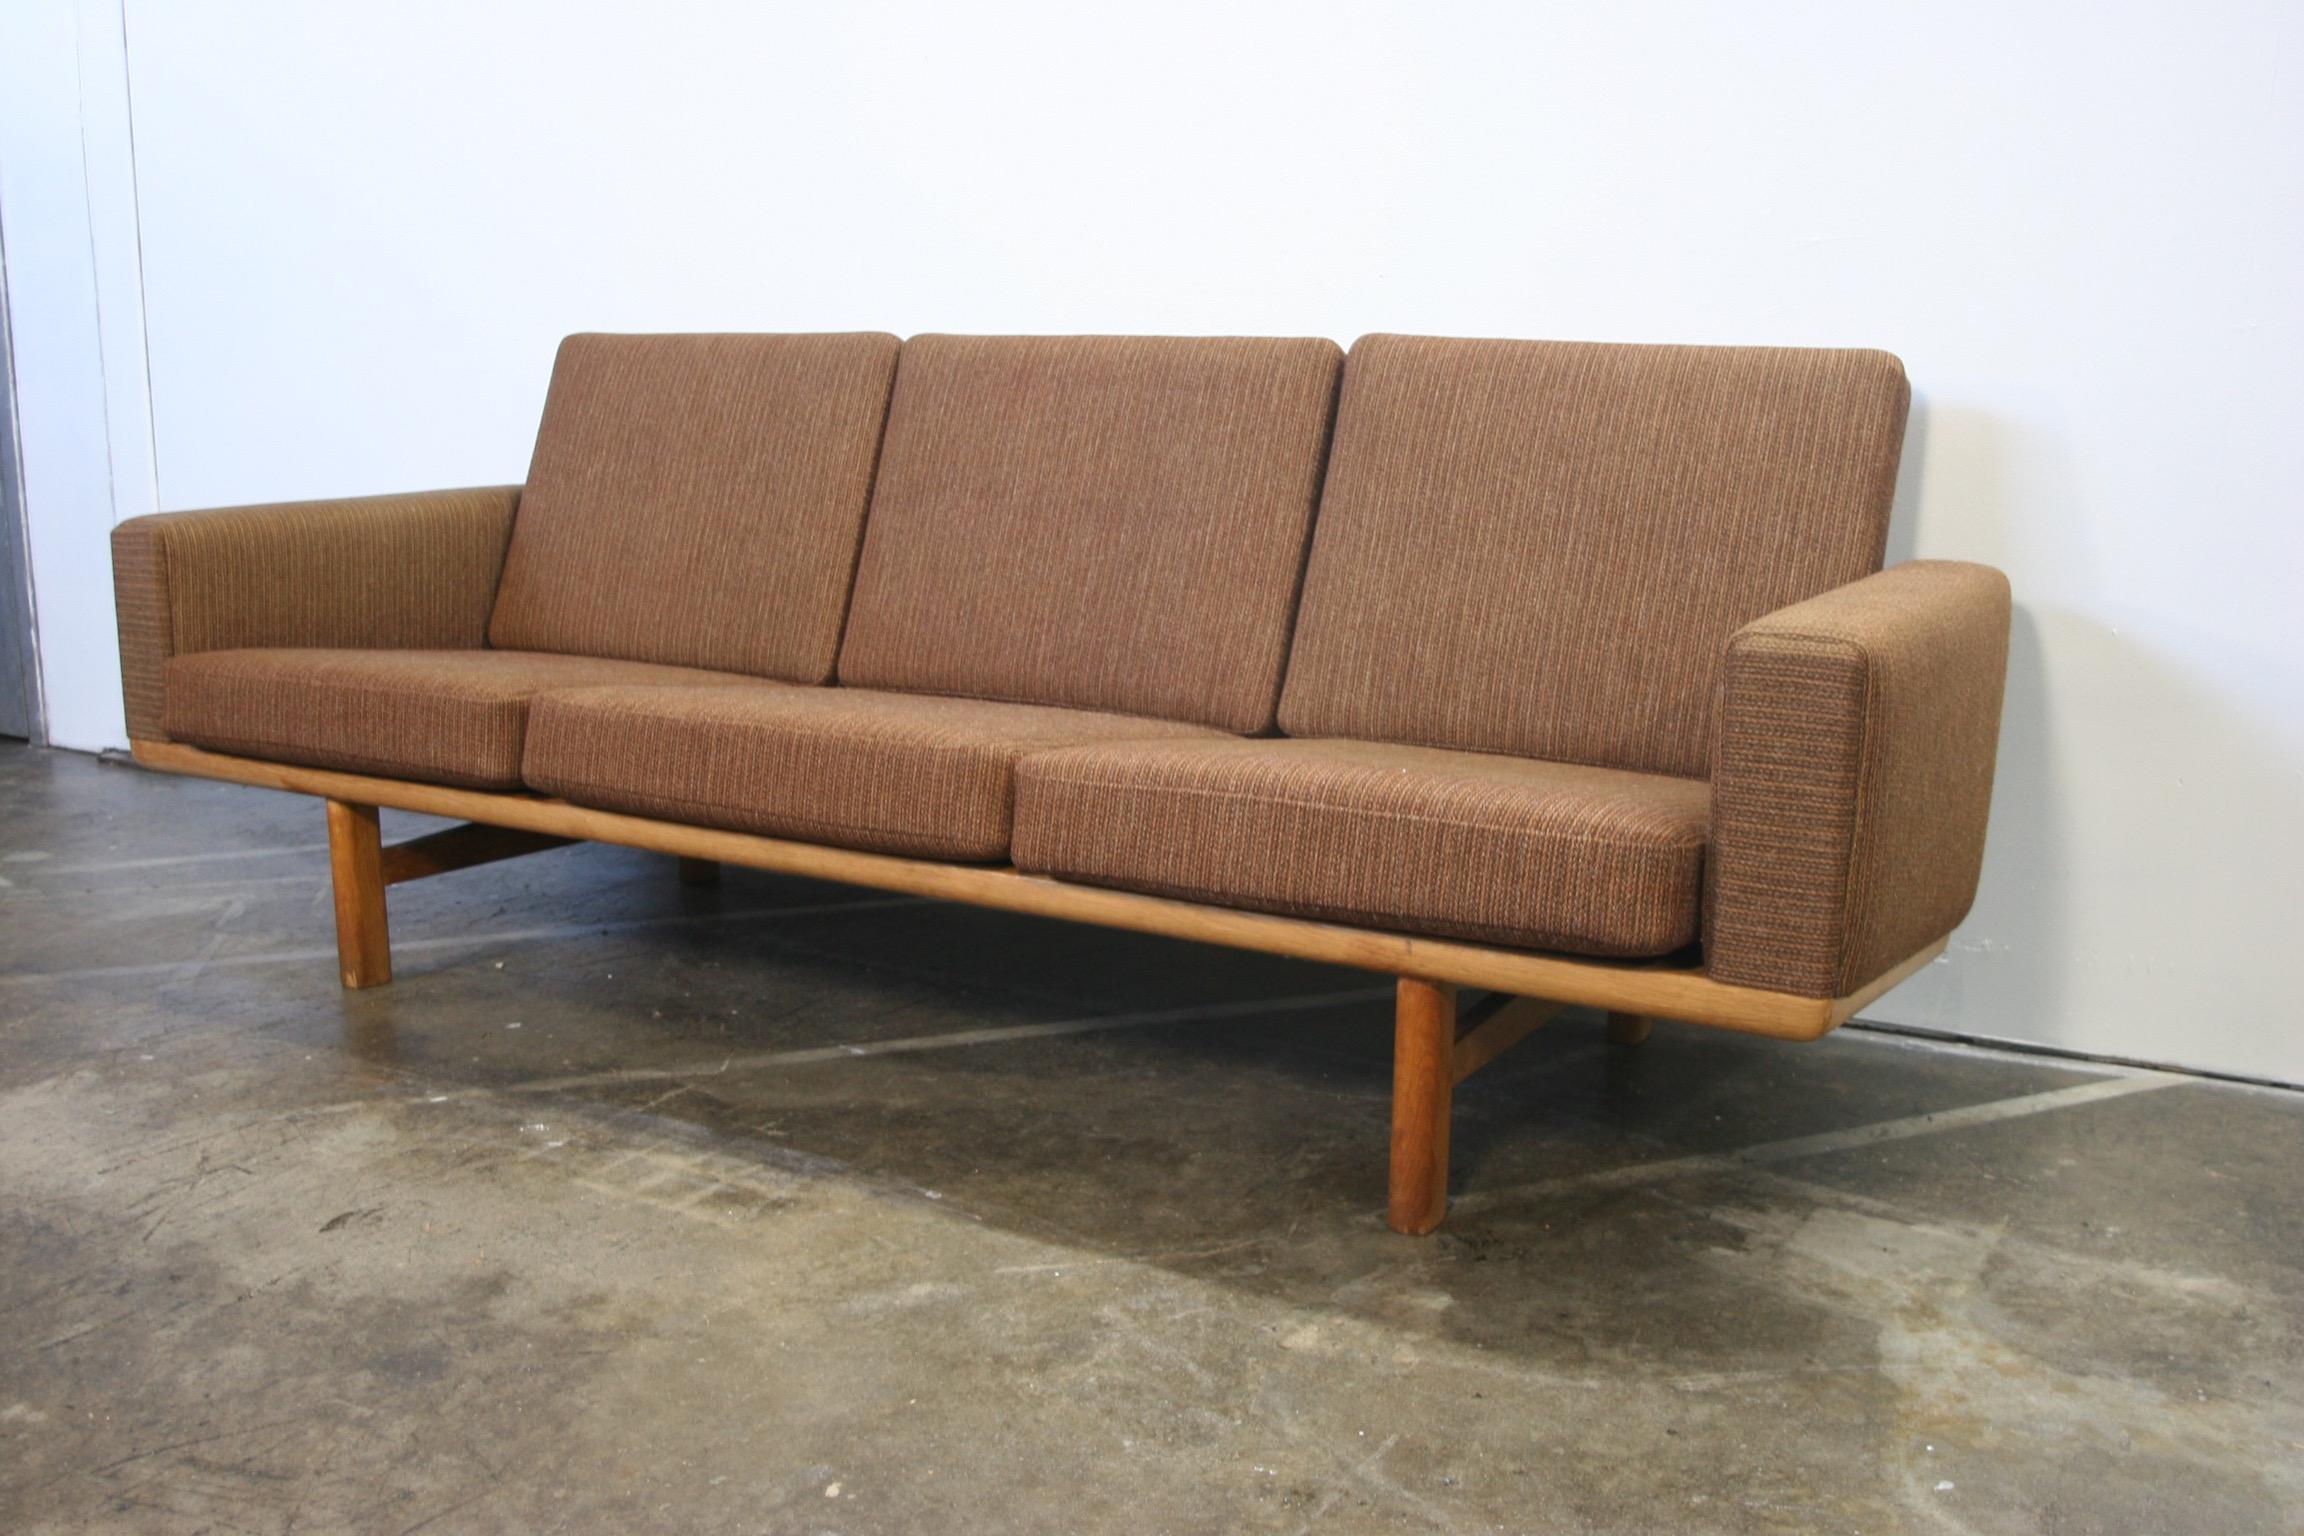 Vintage 1960s Danish three-seat sofa model GE236/3 designed by Hans Wegner for GETAMA Manufacturer solid light oak solid wood frame with original patina has original spring loaded cushions with original medium brown woven wool upholstery in great